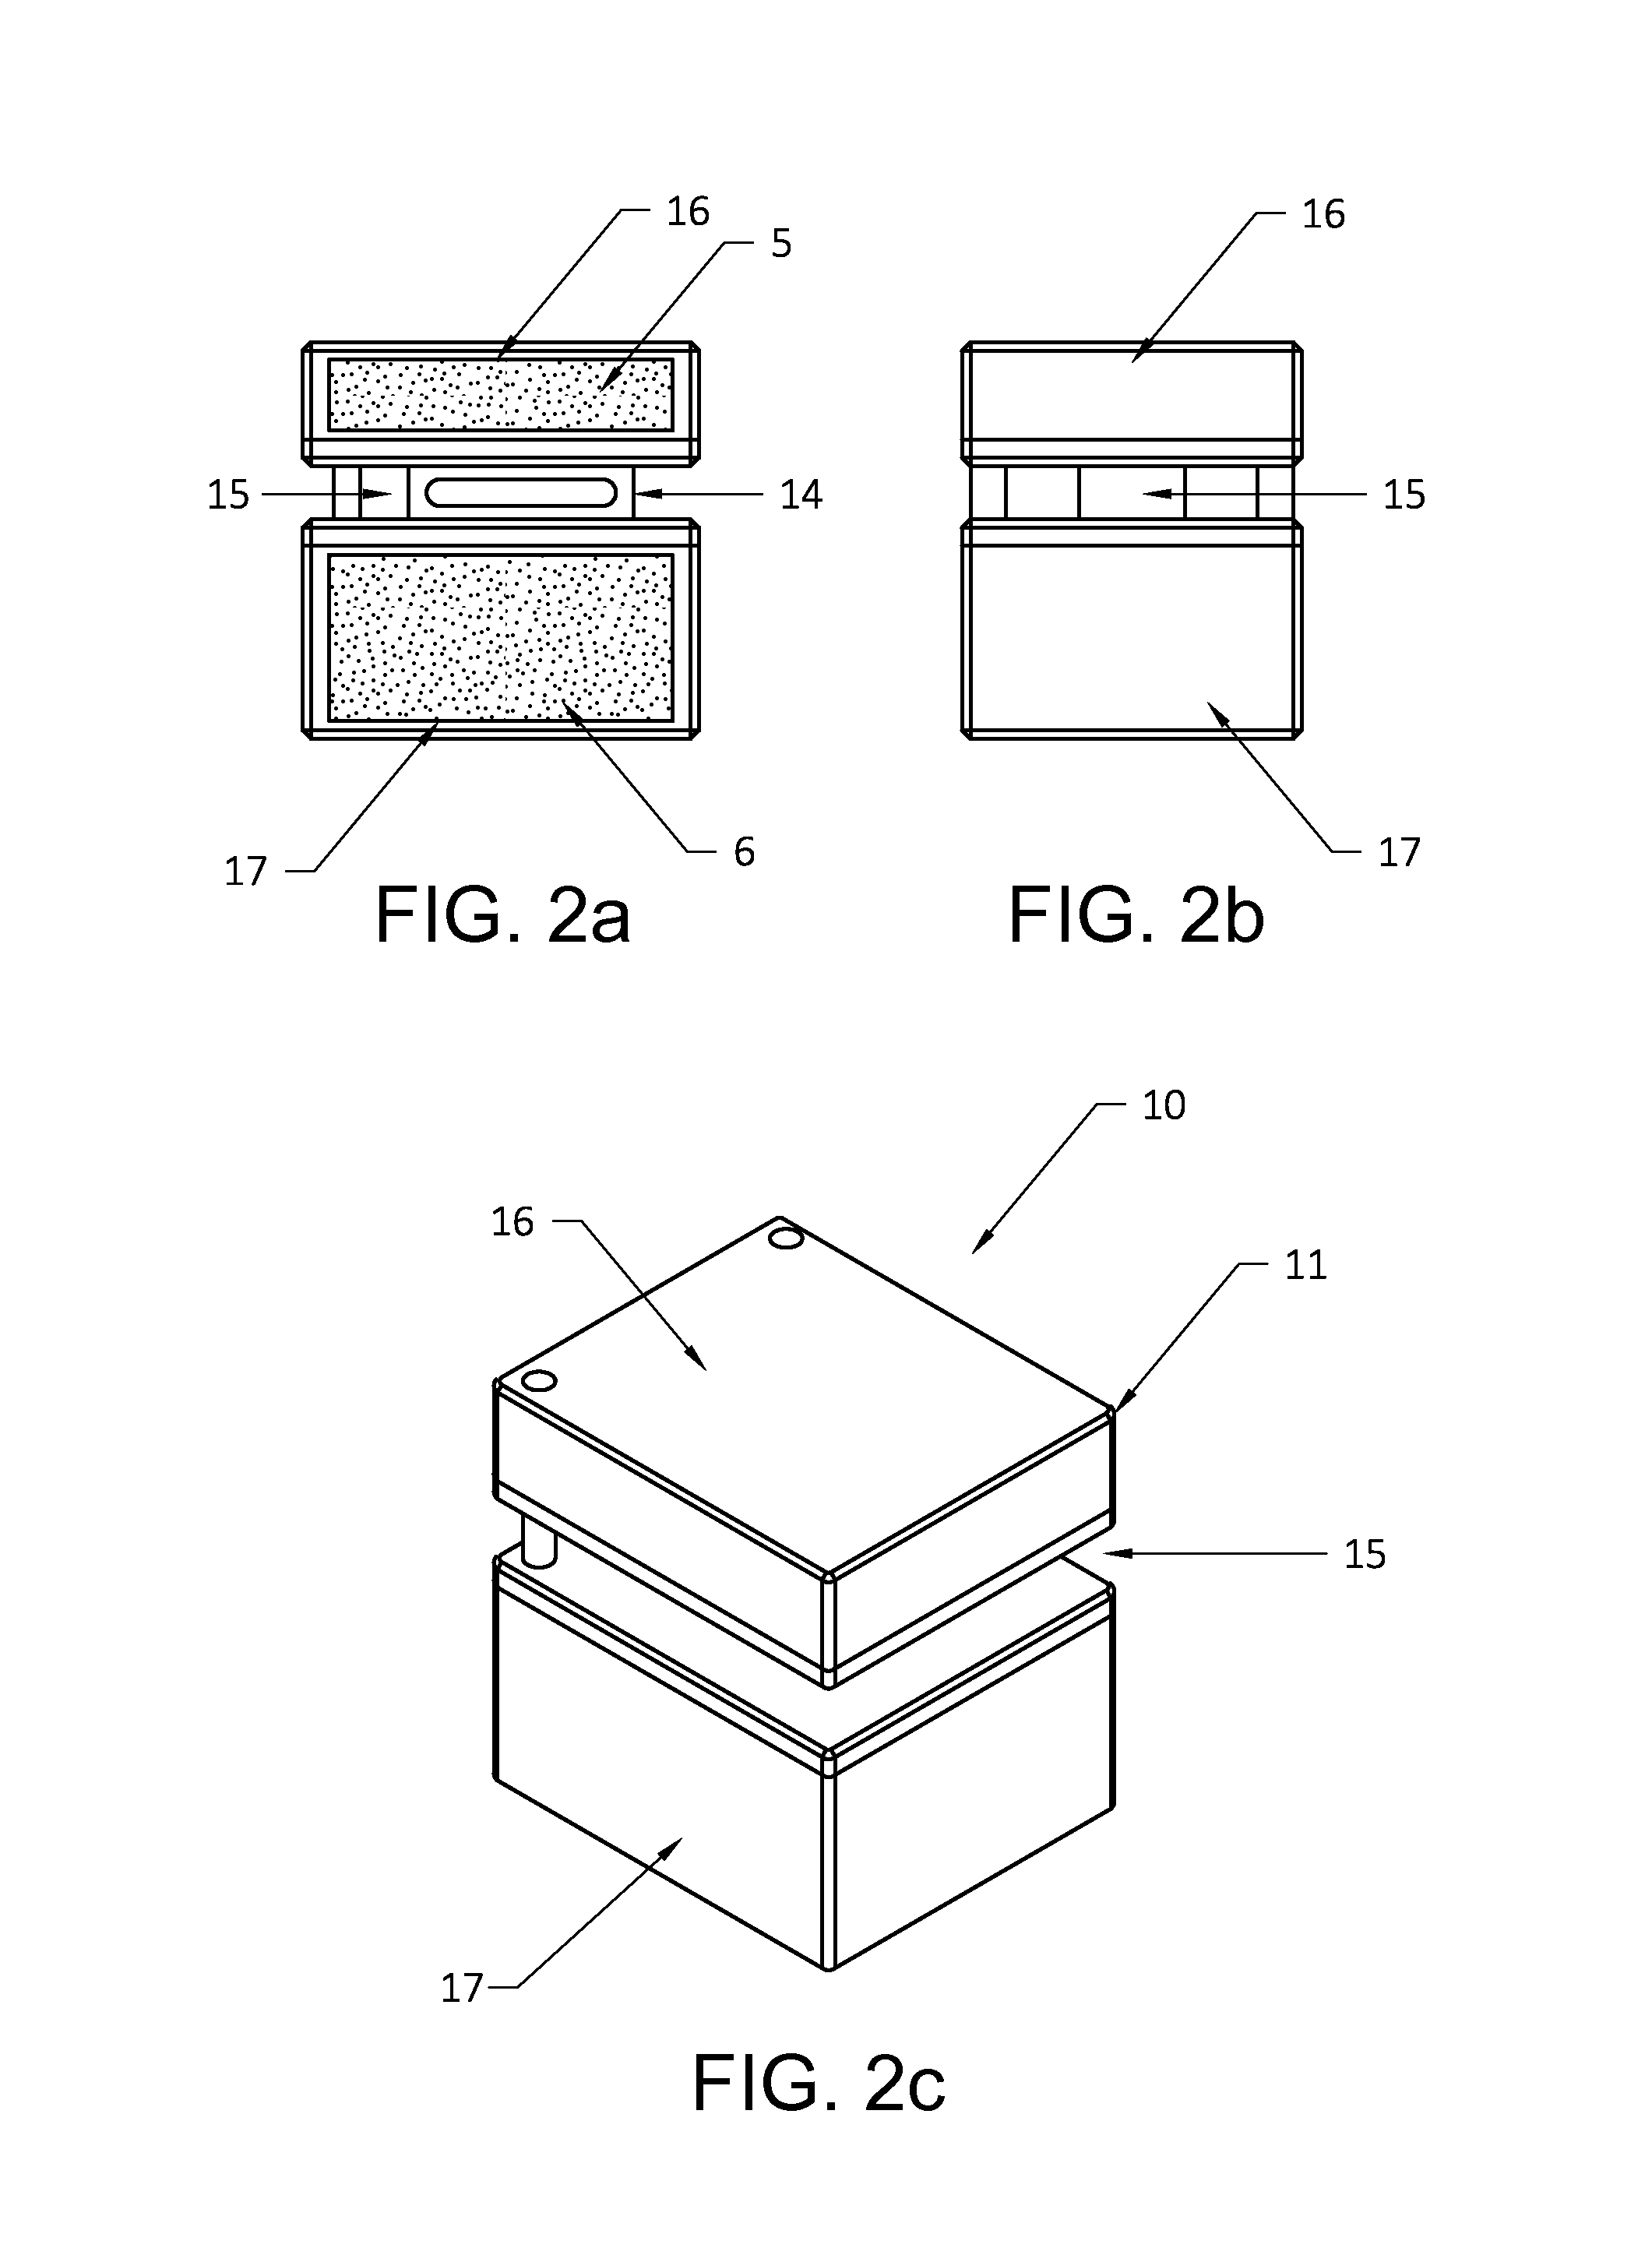 Mobile smart device infrared light measuring apparatus, πmethod, and system for analyzing substances